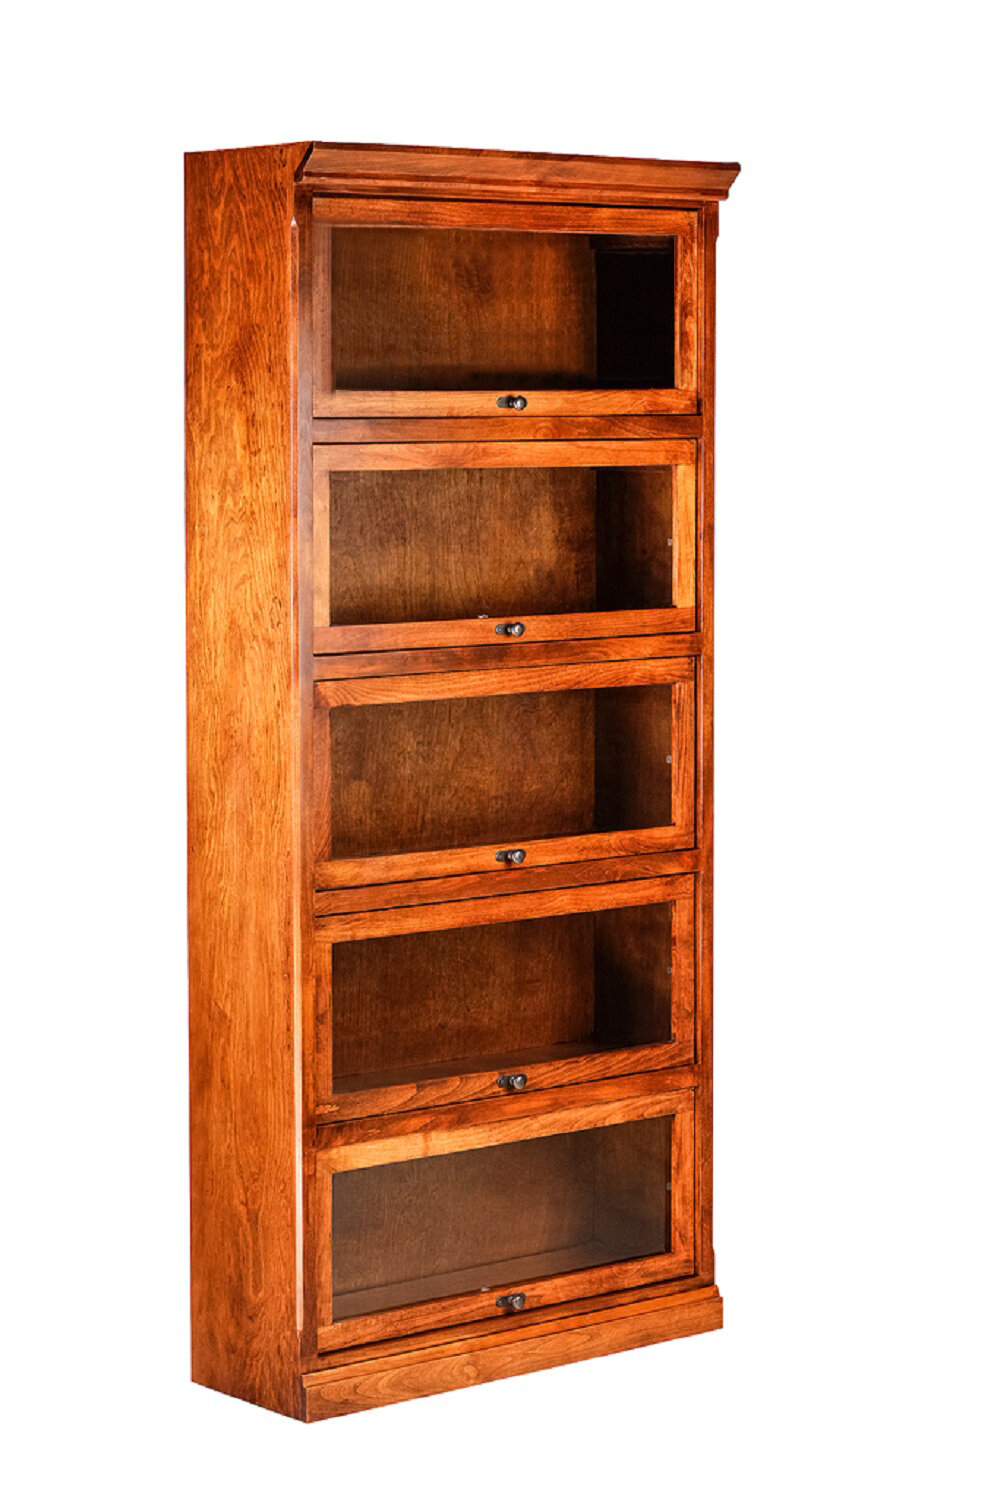 Bookcase With Glass Doors Visualhunt, Glass Front Bookcase Cabinet